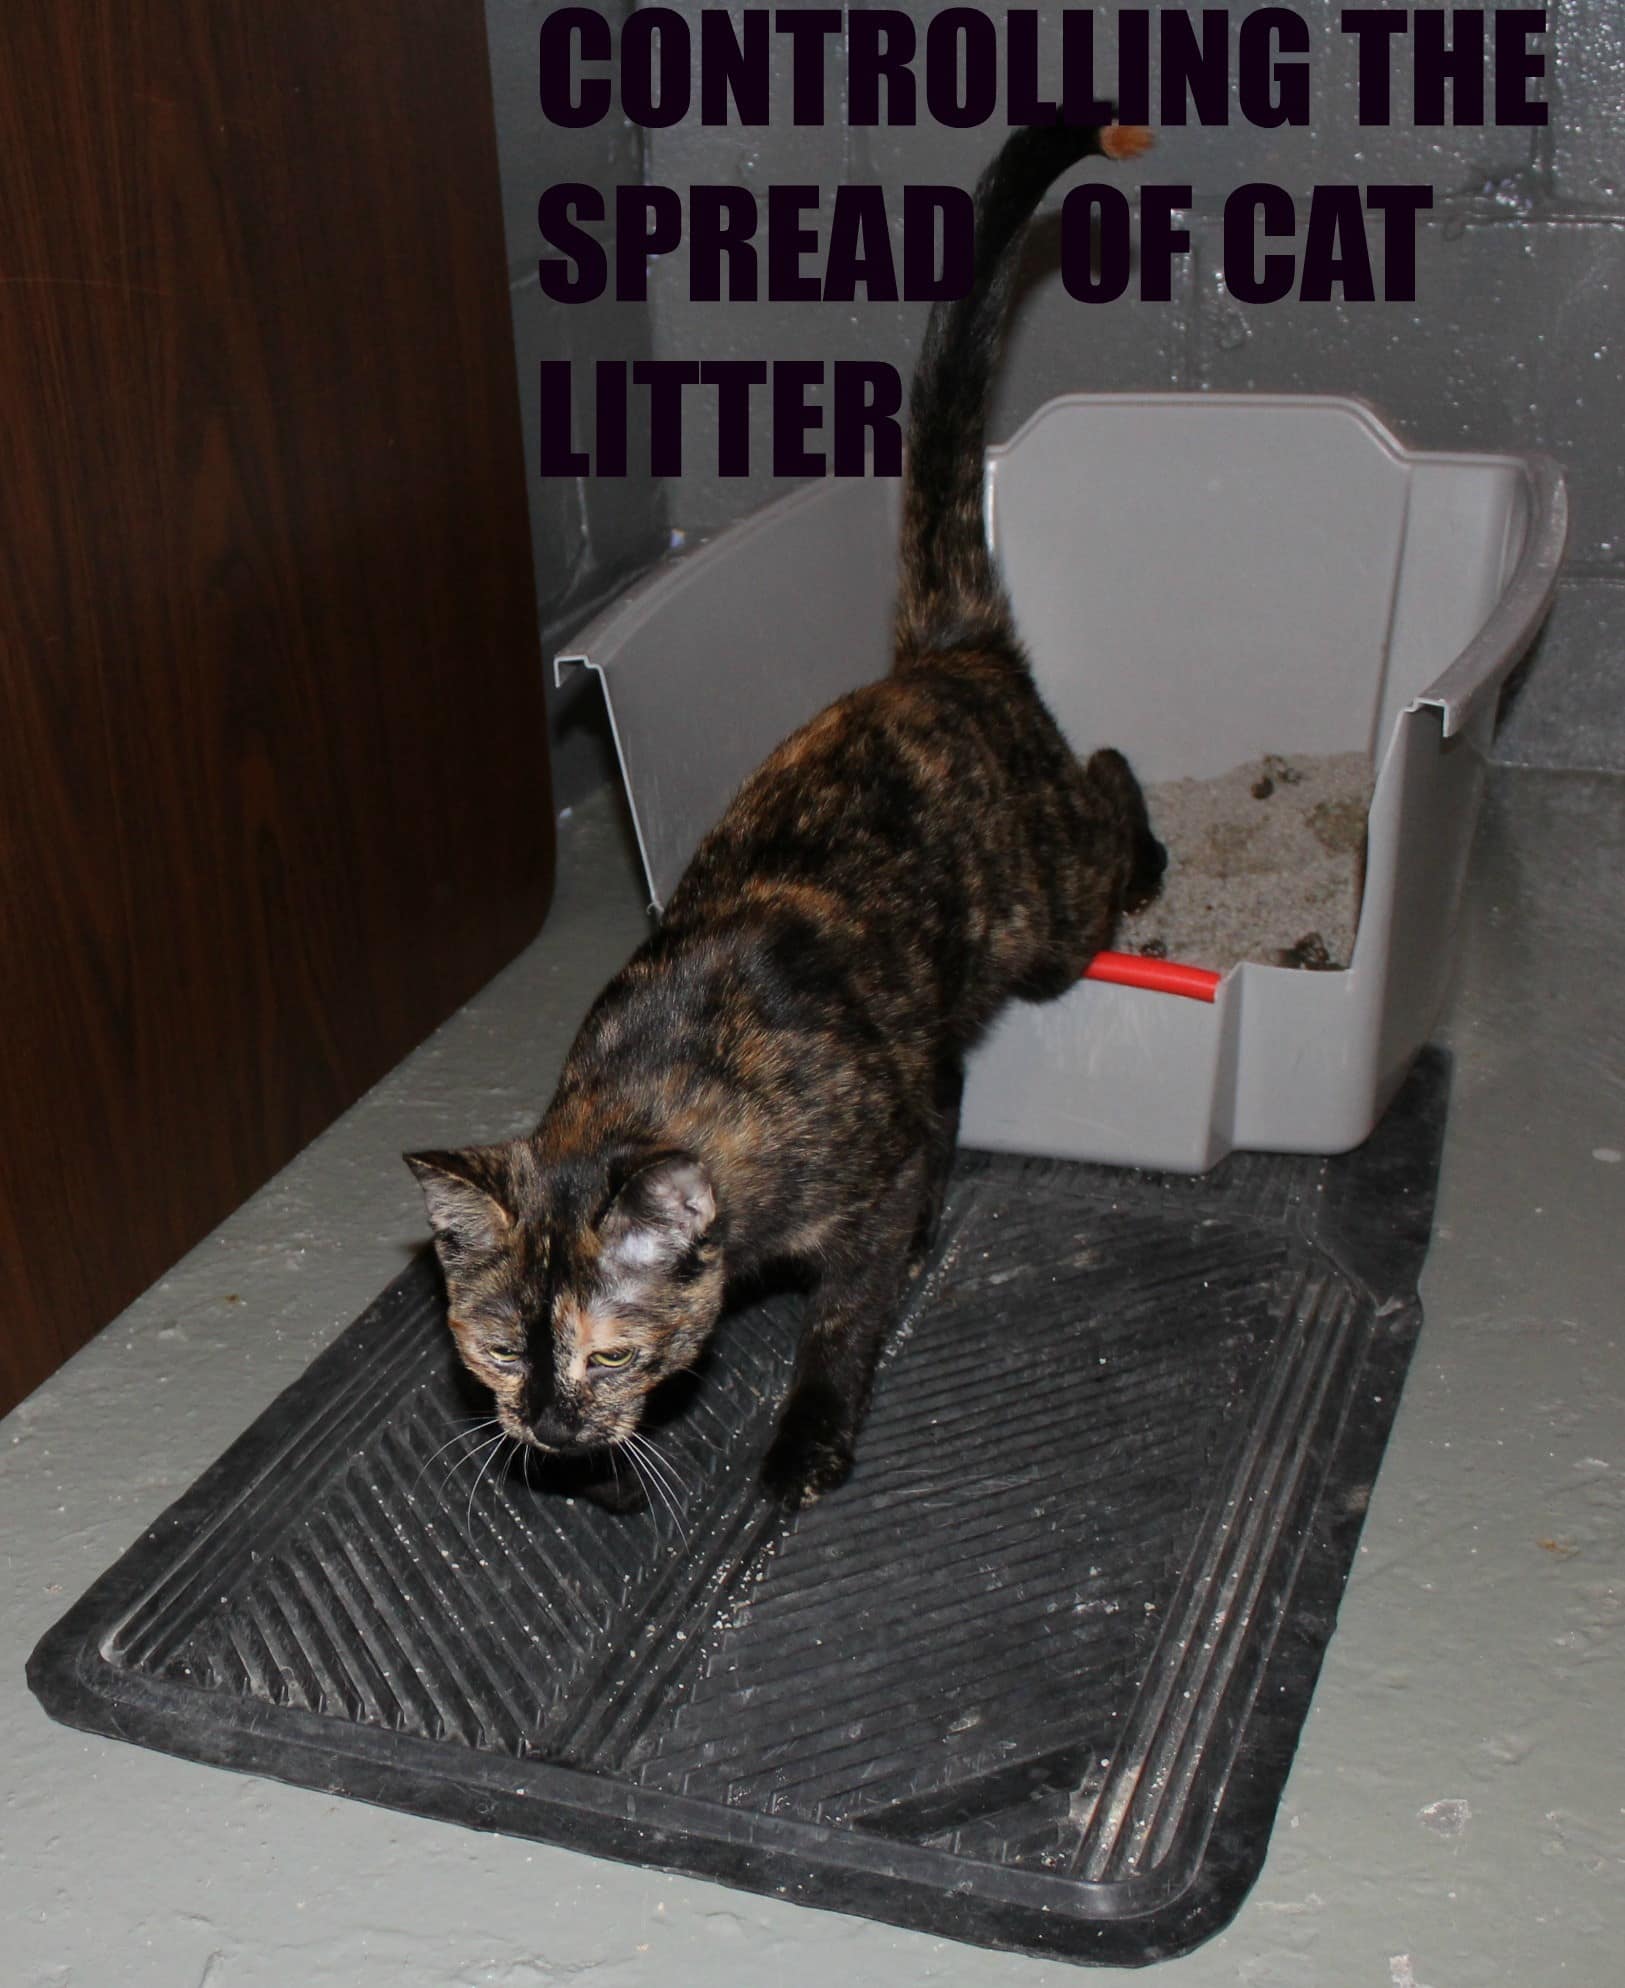 CONTROLLING THE SPREAD OF CAT LITTER